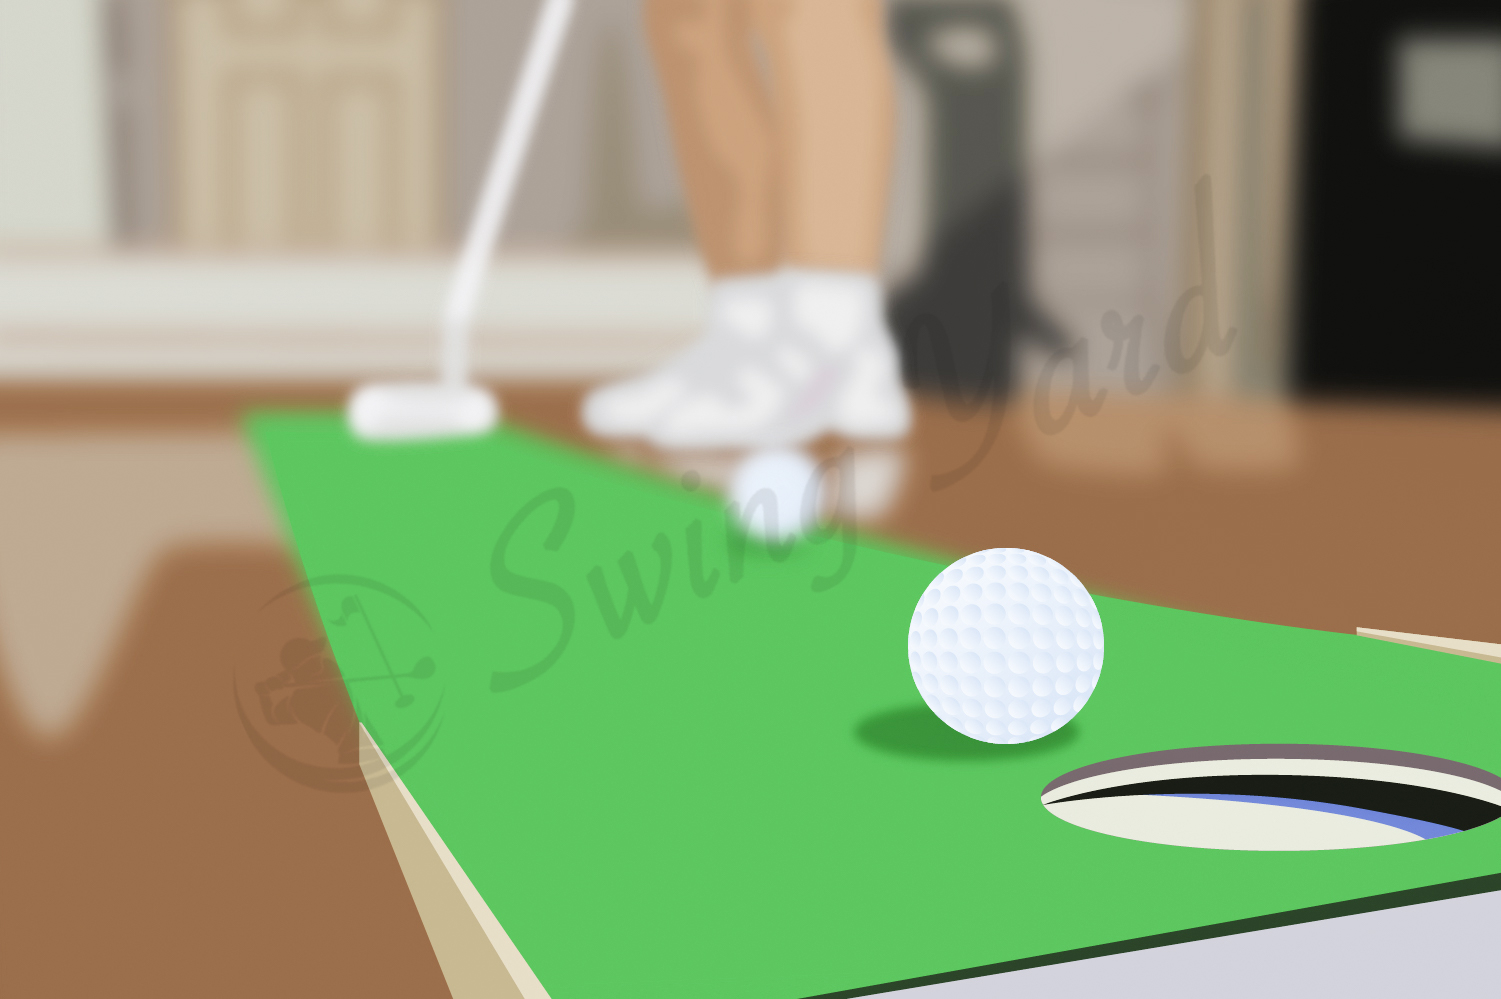 A golfer showing how to practice putting at home